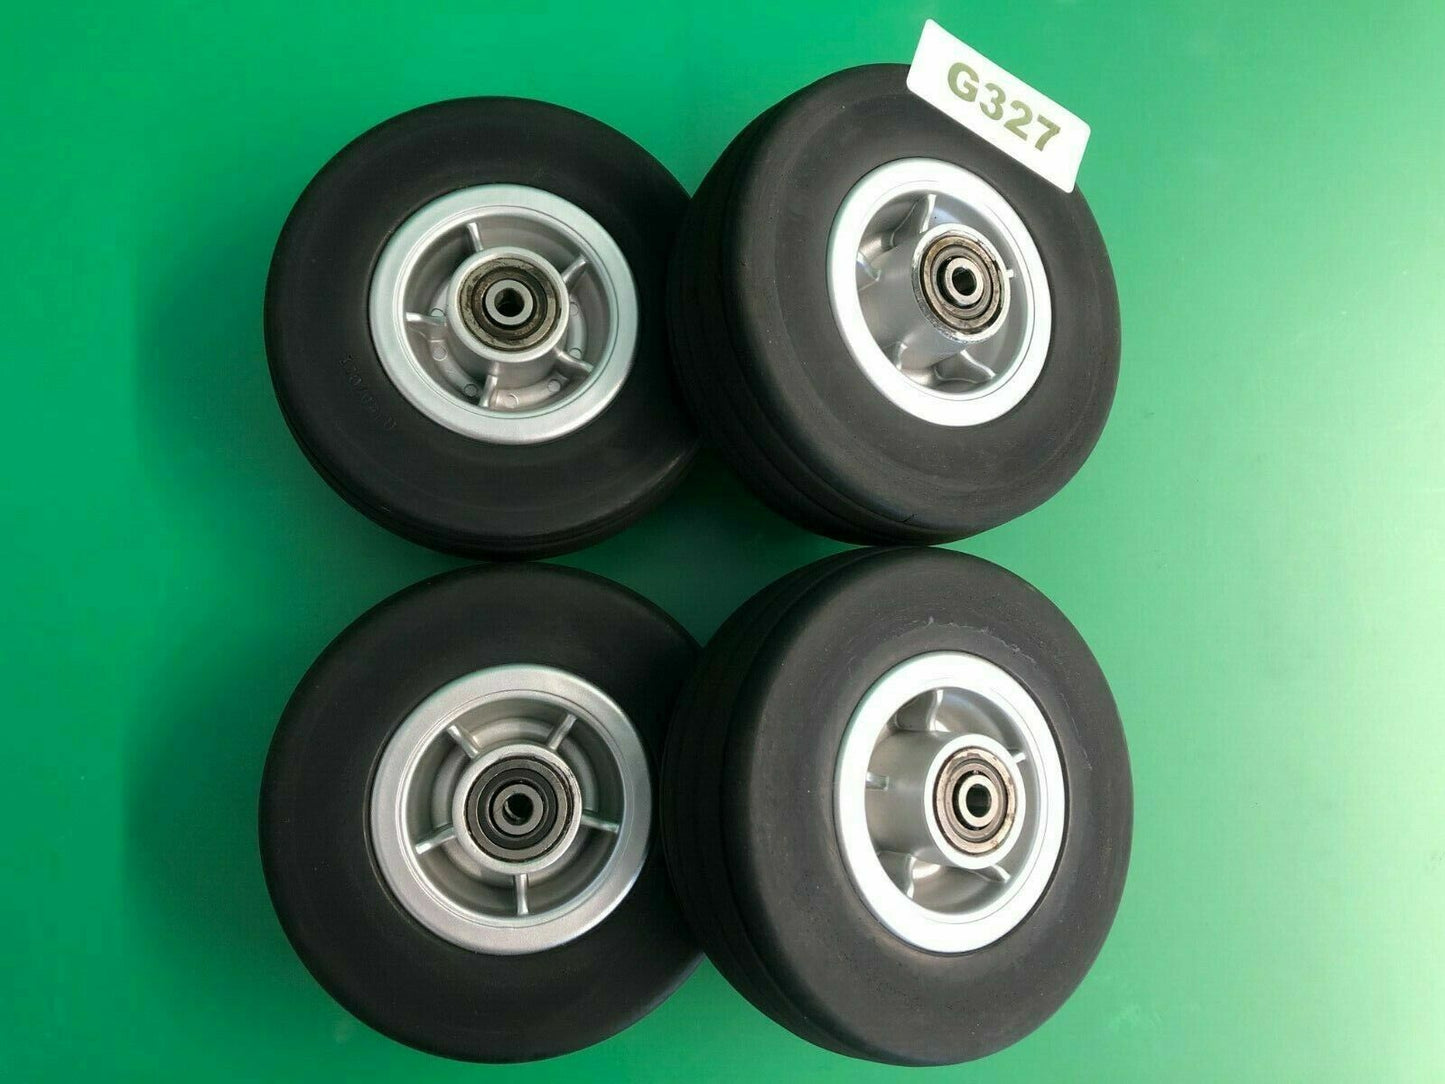 Rear & Front Caster Wheels for Pride Jazzy 600 ES Powerchairs -set of 4- #G327